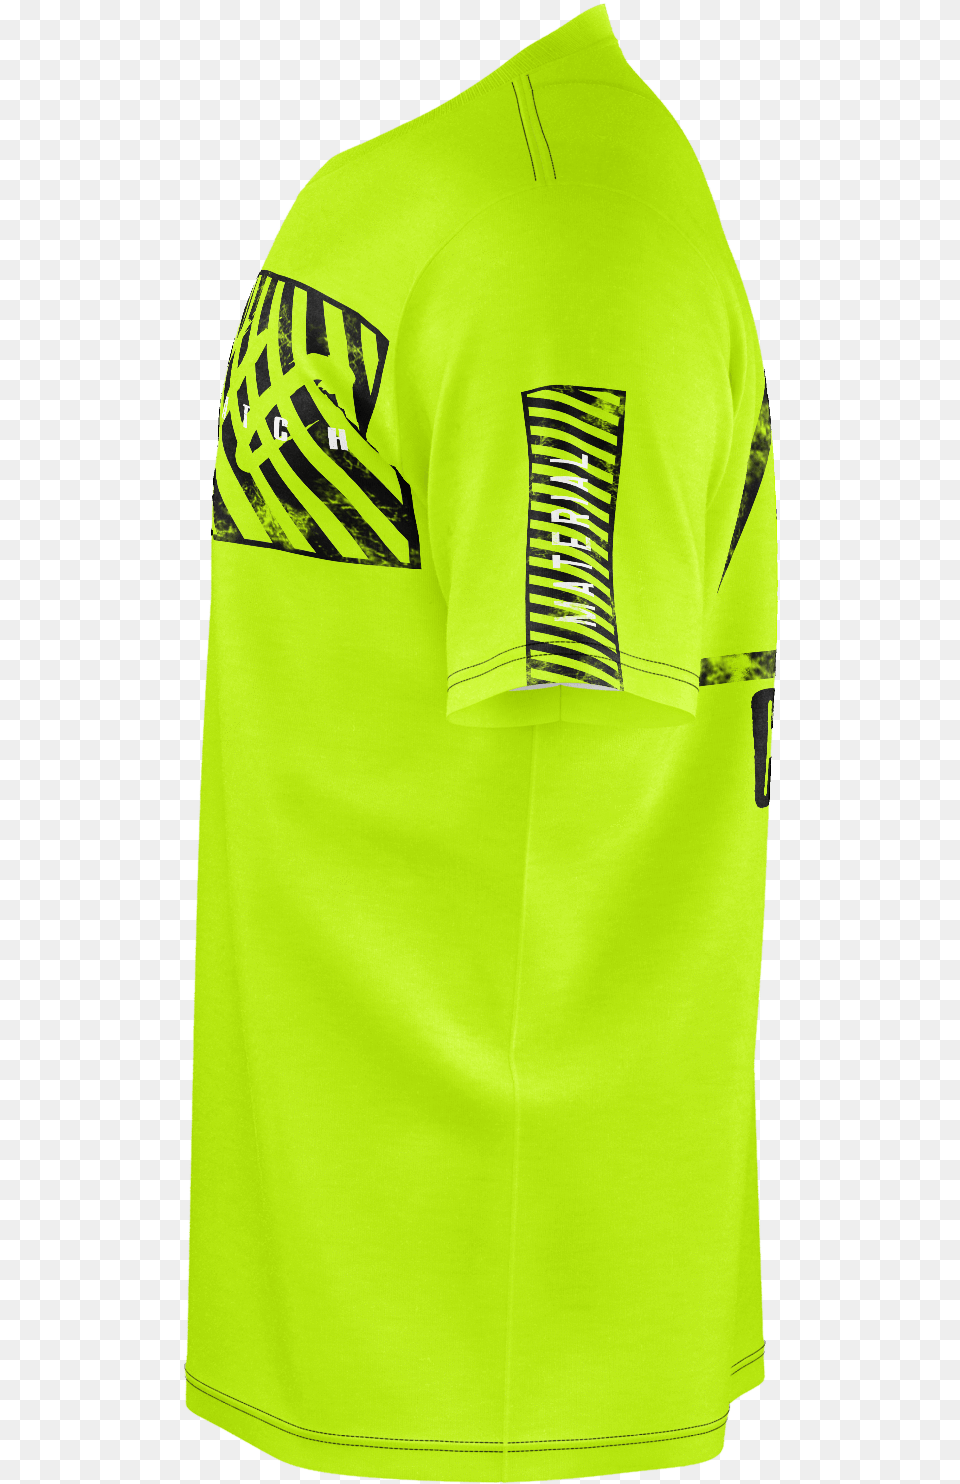 Caution Tape T Shirt Day Dress, Clothing, Coat, Adult, Male Free Transparent Png